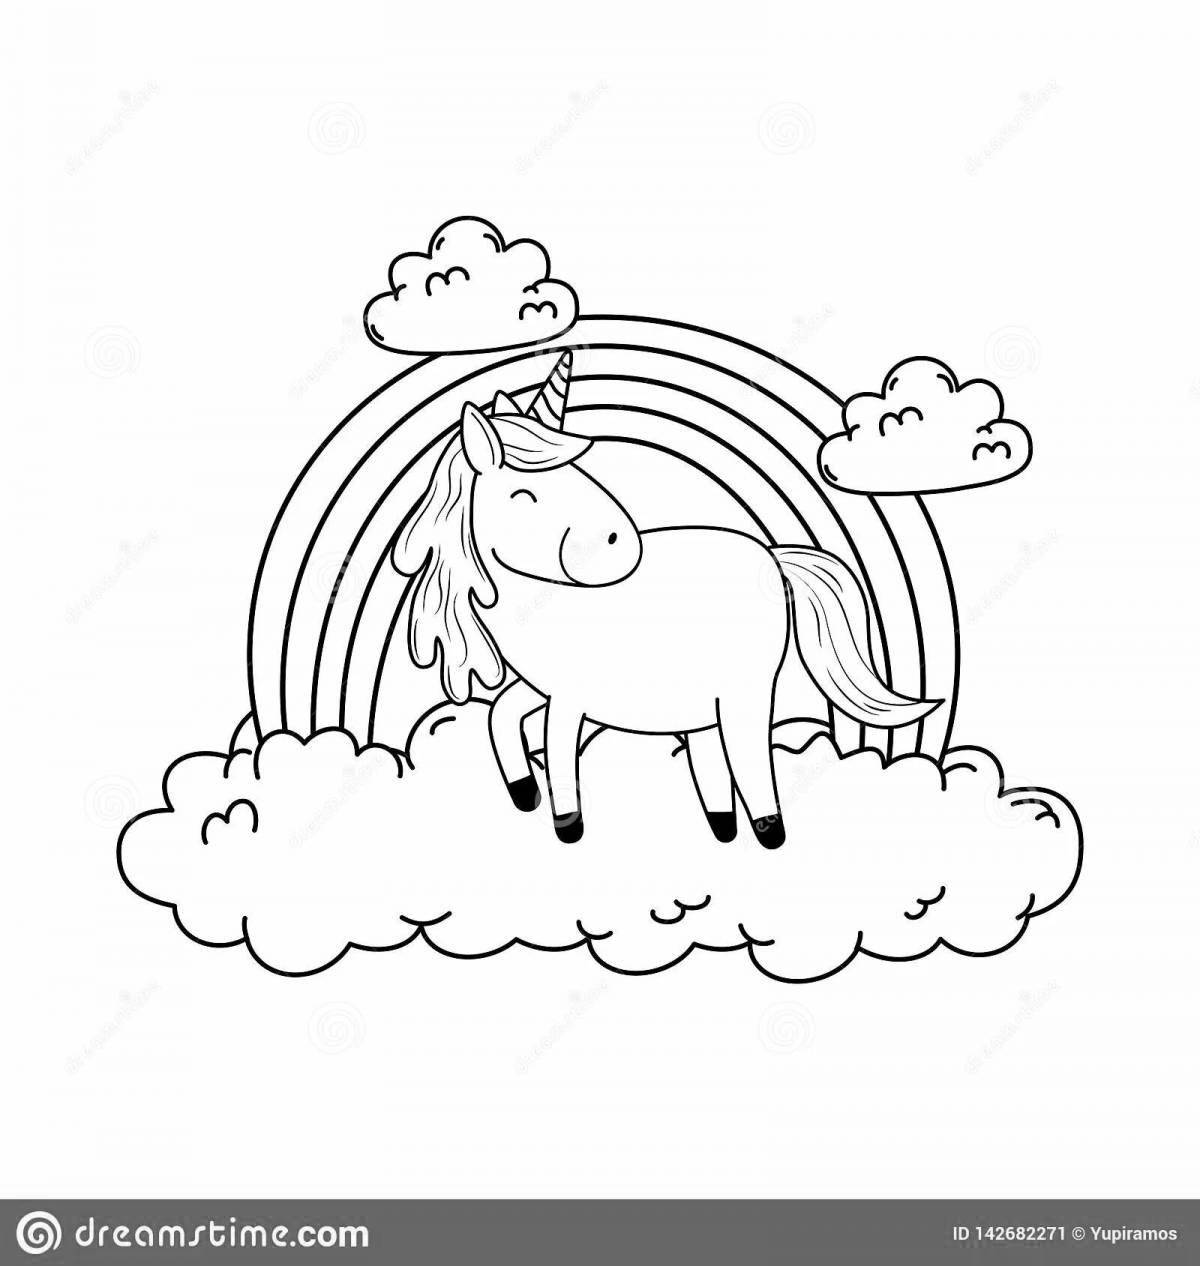 Radiant coloring page unicorn cloud